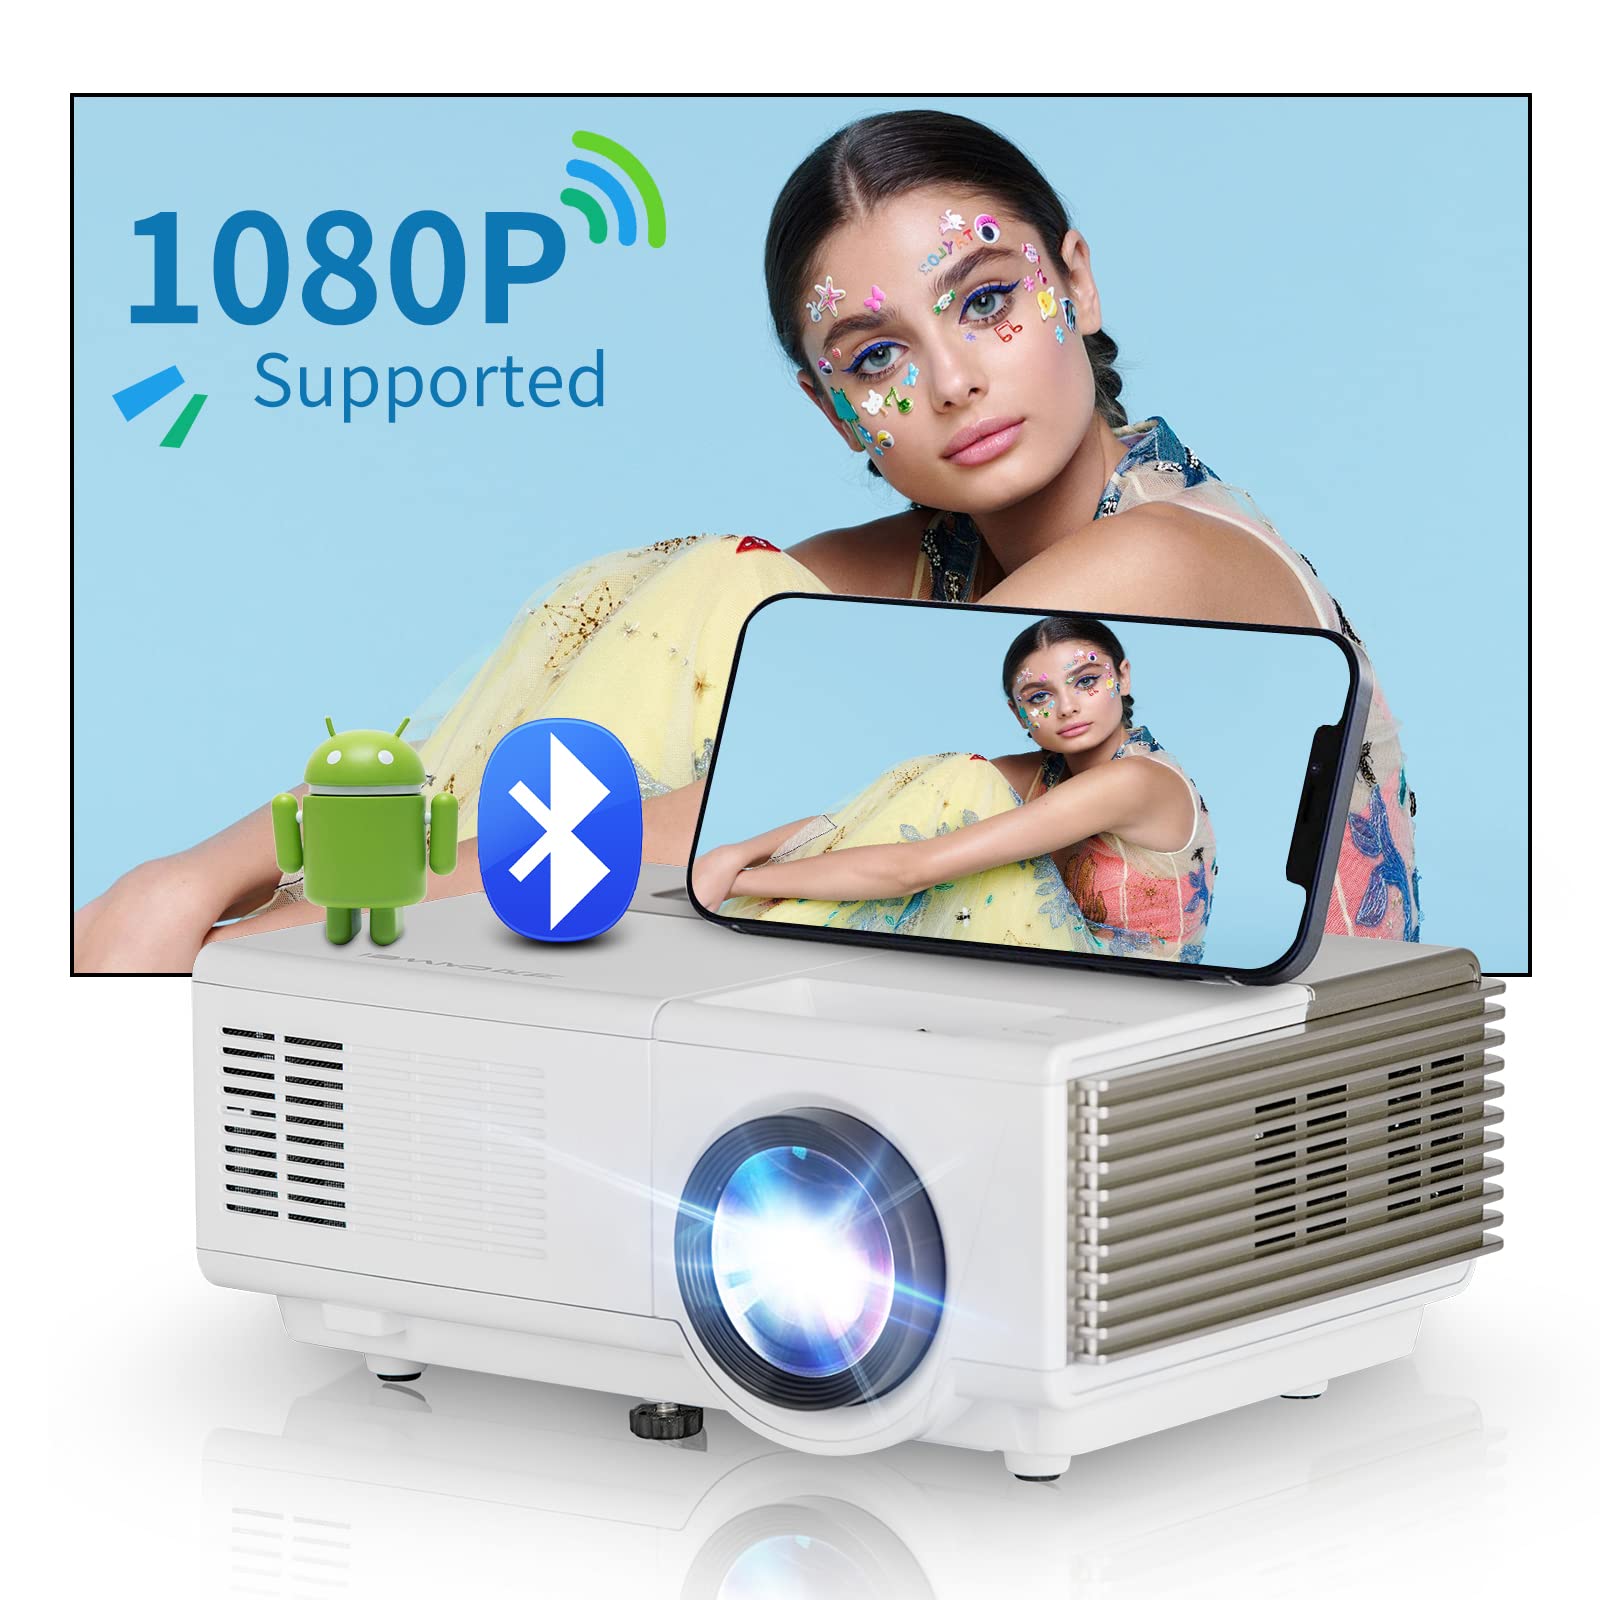 New WiFi Mini Projector, Full HD 1080P Supported Smart Android Projector with Bluetooth, Portable Outdoor Movie Projector Wireless Mirroring Home T...